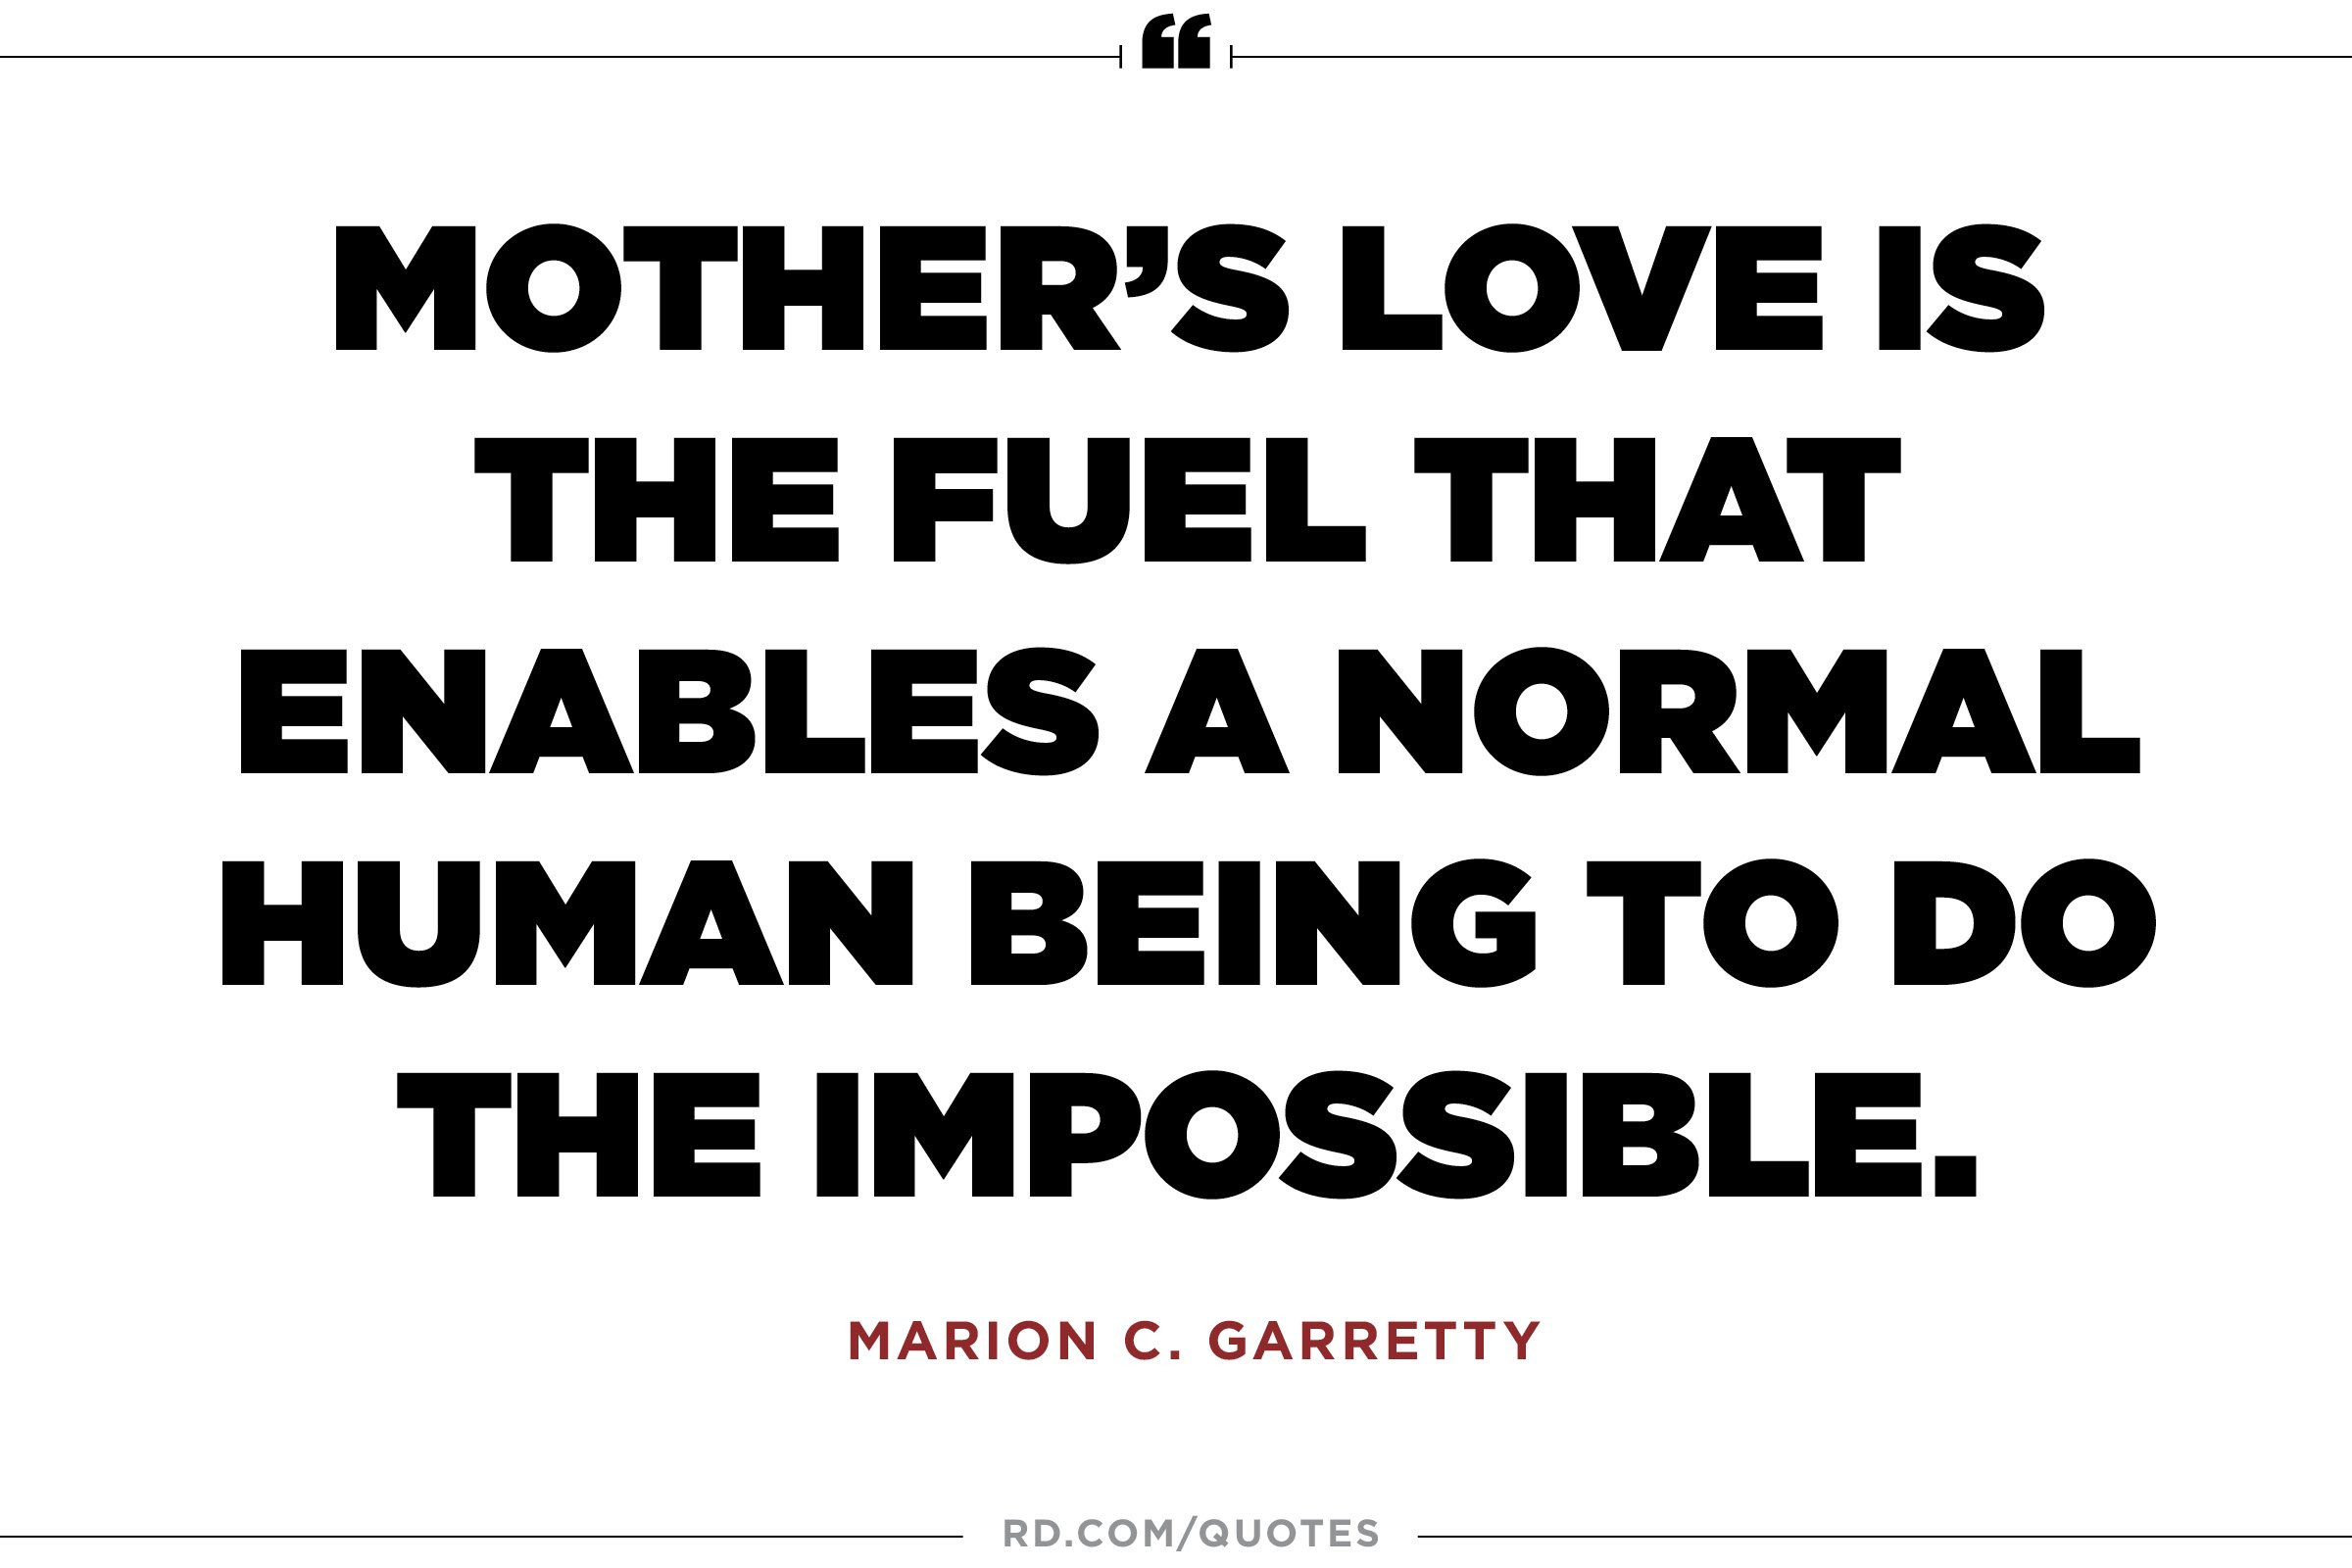 Quotes On Mothers Love
 11 Quotes About Mothers That ll Make You Call Yours